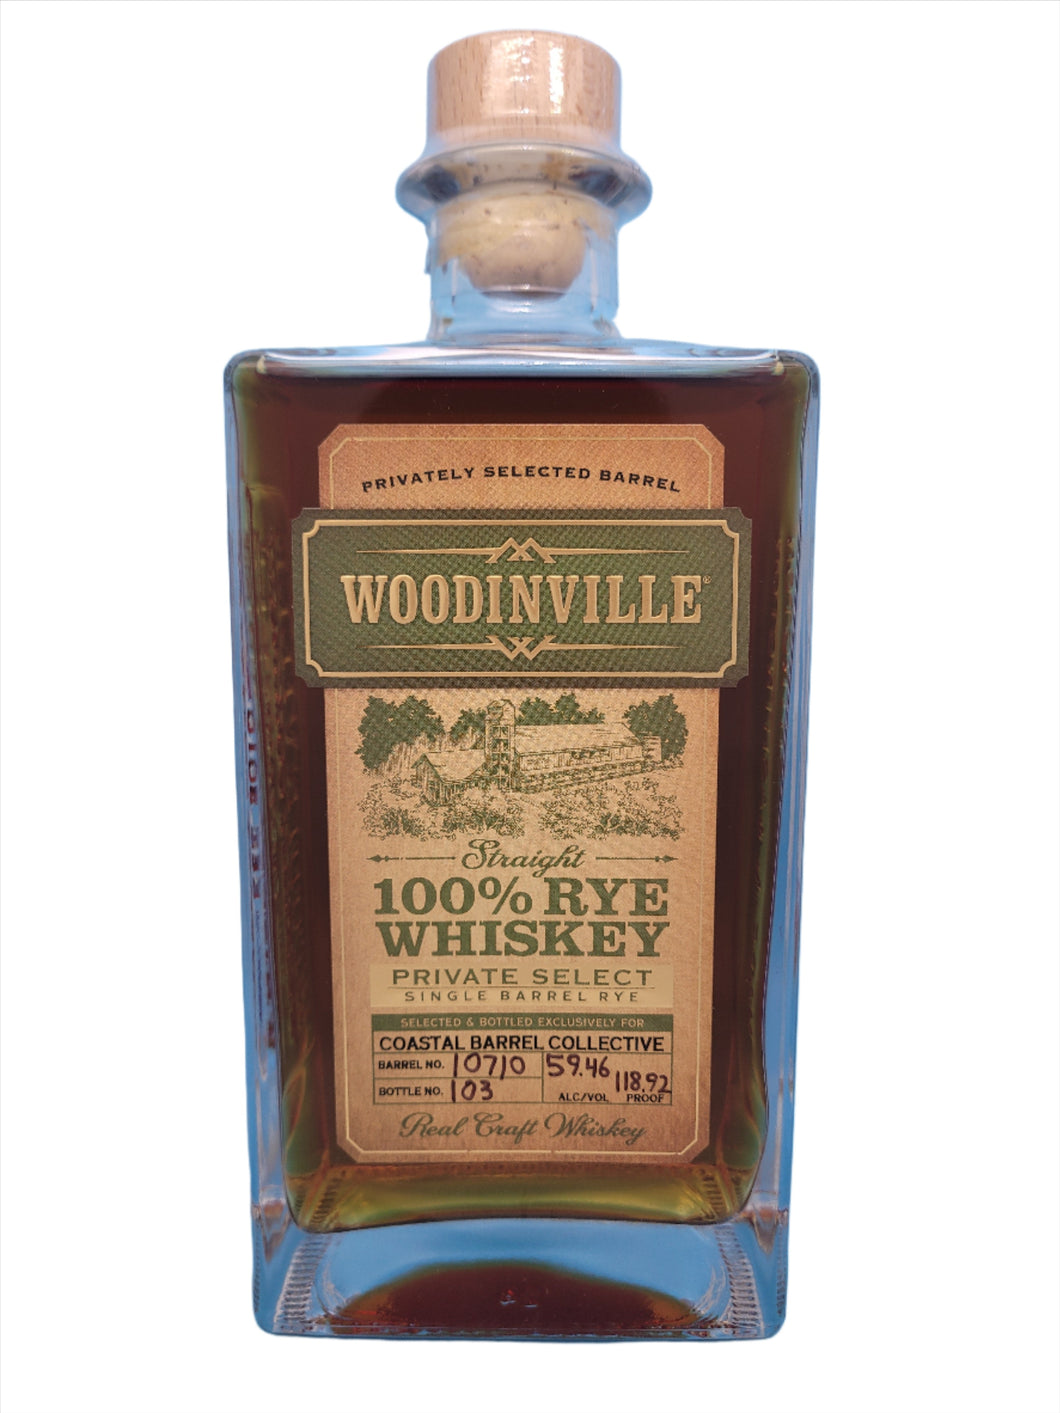 Woodinville Whiskey Co. Private Select Single Barrel Straight Rye Whiskey